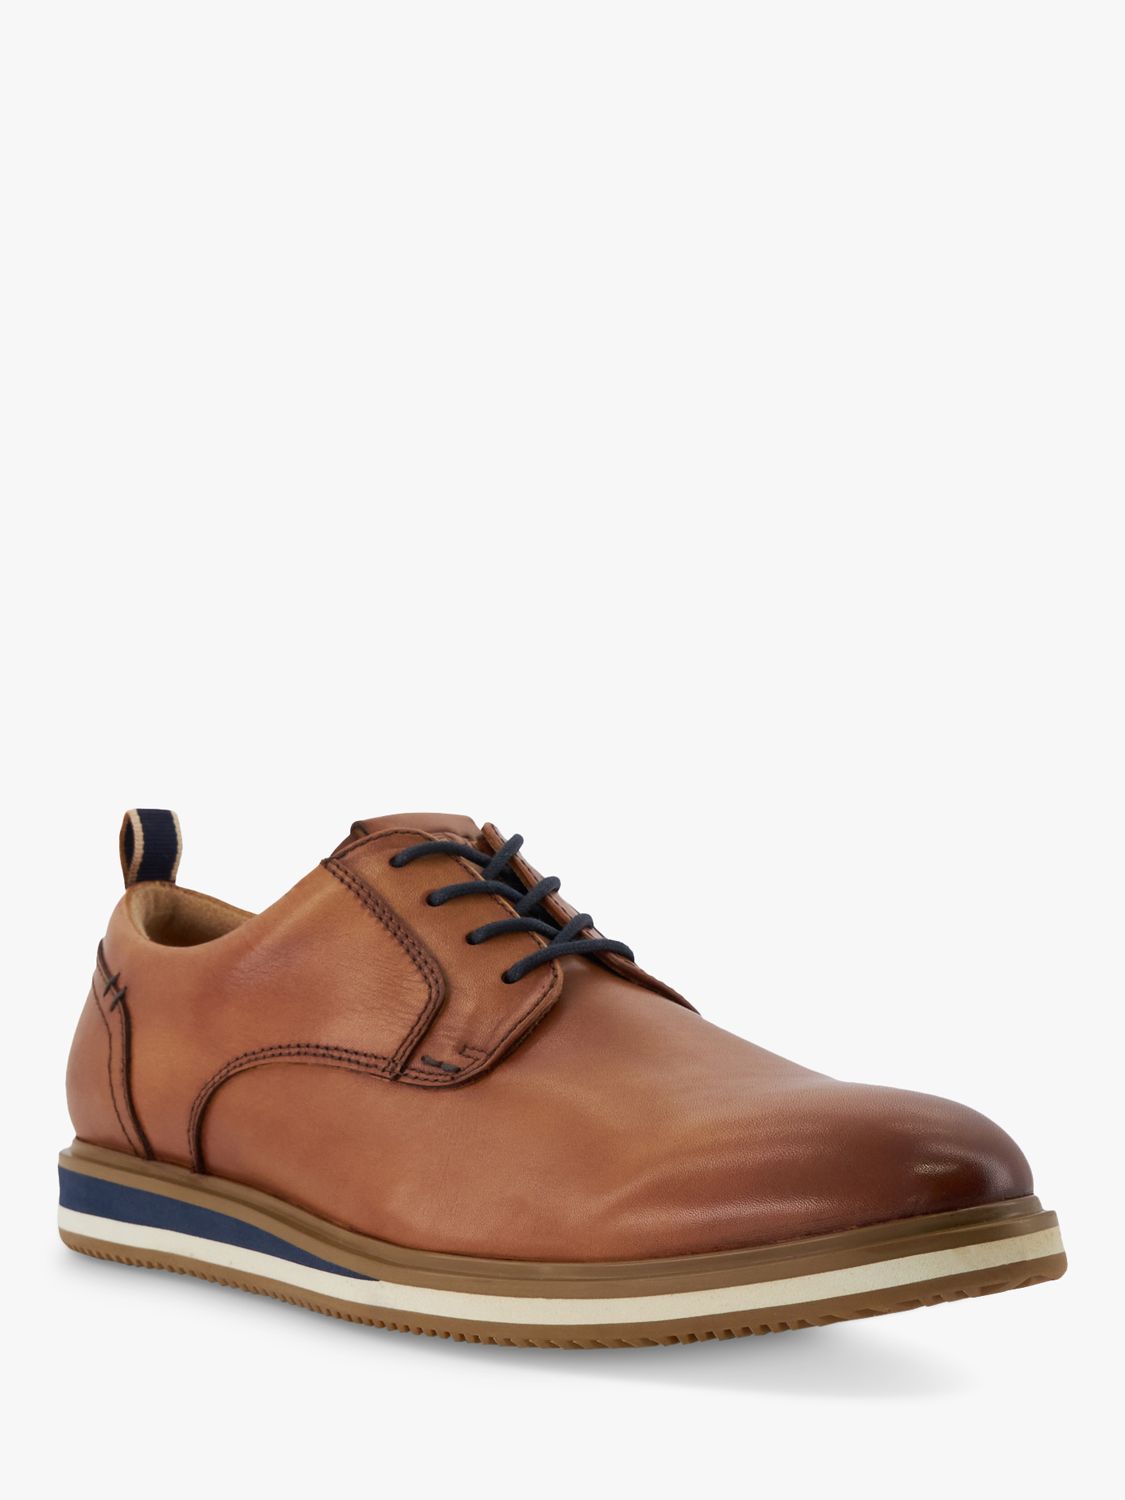 Buy Dune Wide Fit Blaksley Leather Plain Toe Hybrid Sole Shoes, Tan Online at johnlewis.com